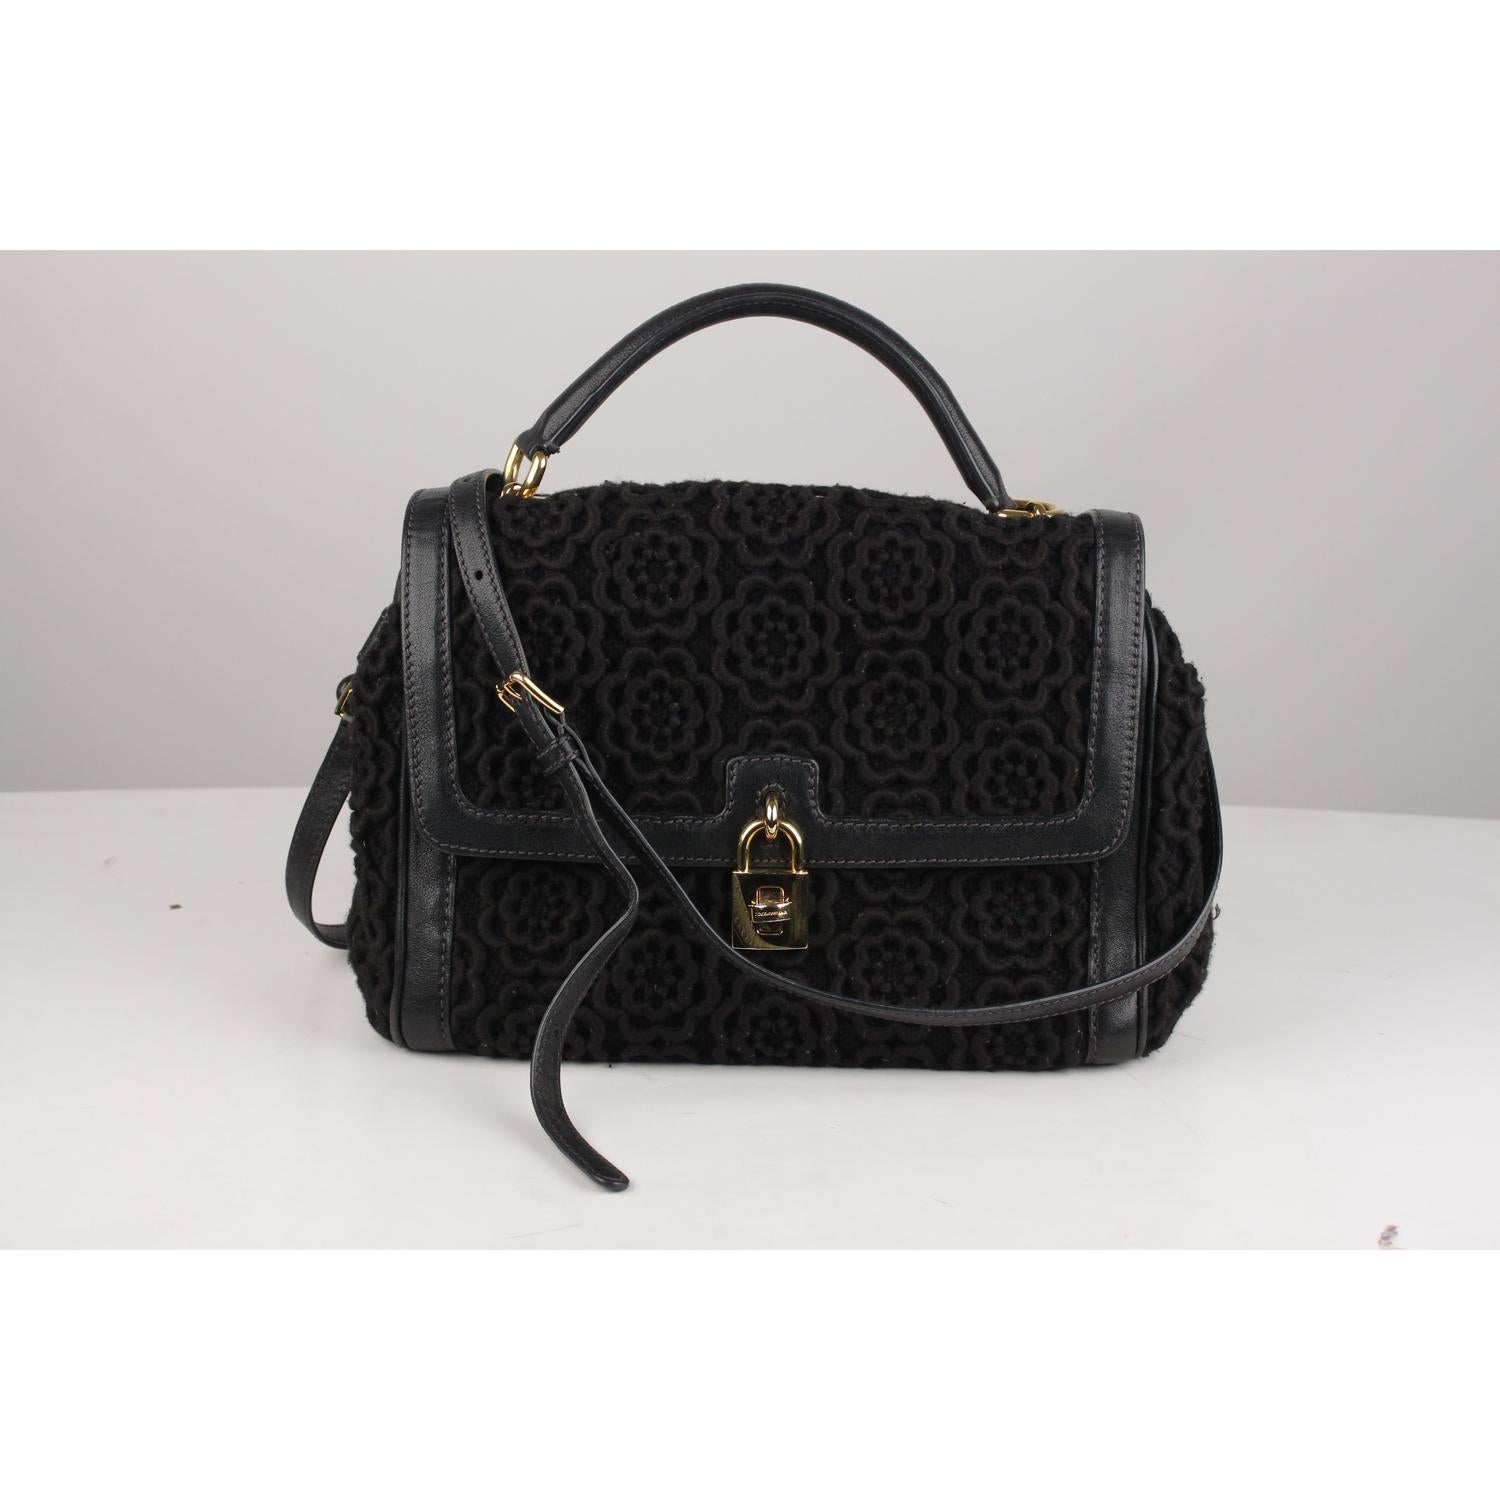 Dolce & Gabbana 'Miss Bonita' Satchel in black crochet and tweed fabric with genuine leather trim, handle and choulder strap. It features a chain-link and leather handle, removable shoulder strap, flap with decorative padlock with twistclosure and